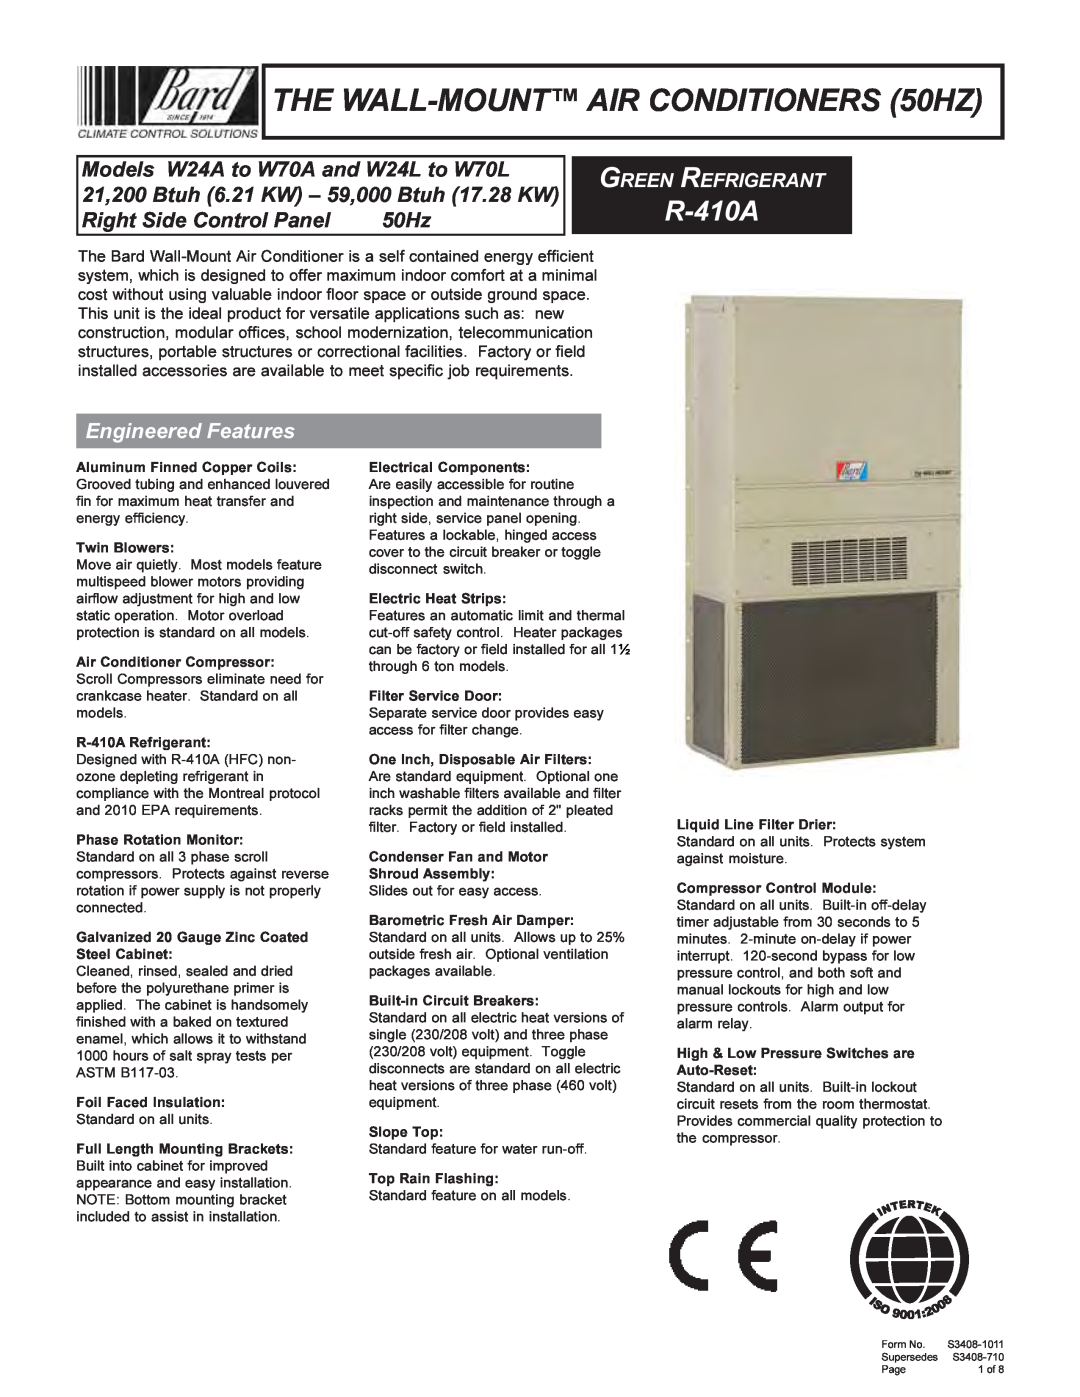 Bard W24A to W70A manual Right Side Control Panel, 50Hz, THE WALL-MOUNTAIR CONDITIONERS 50HZ, R-410A, Green Refrigerant 